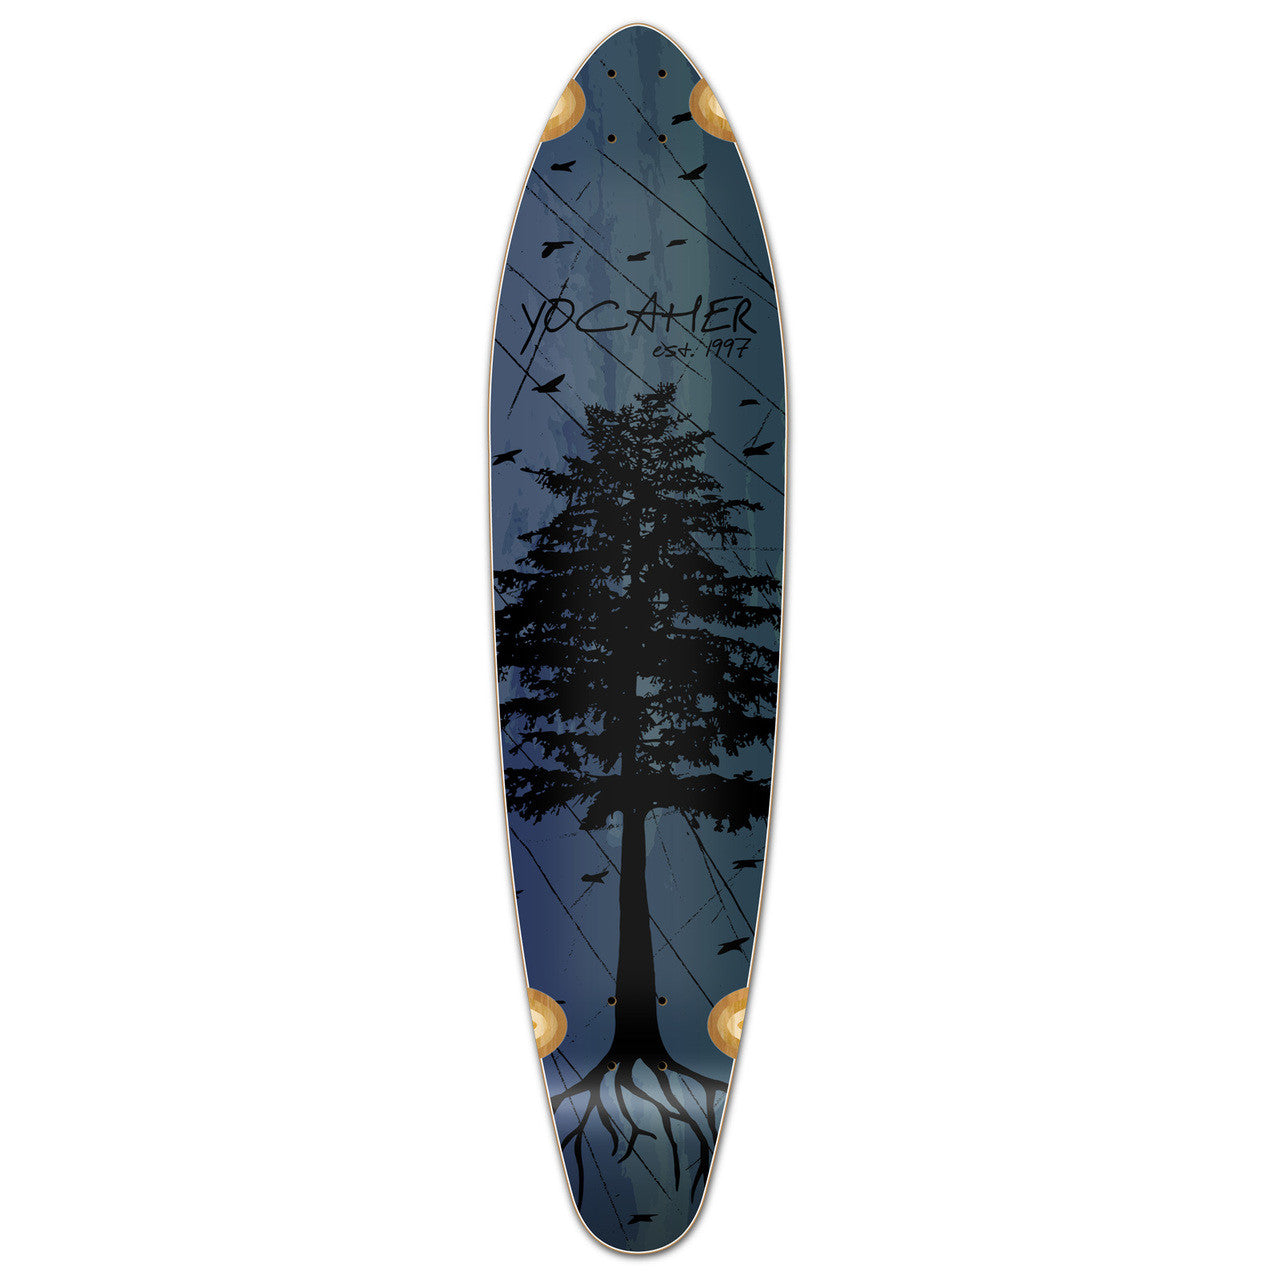 Yocaher Kicktail Longboard Deck - In the Pines : Blue